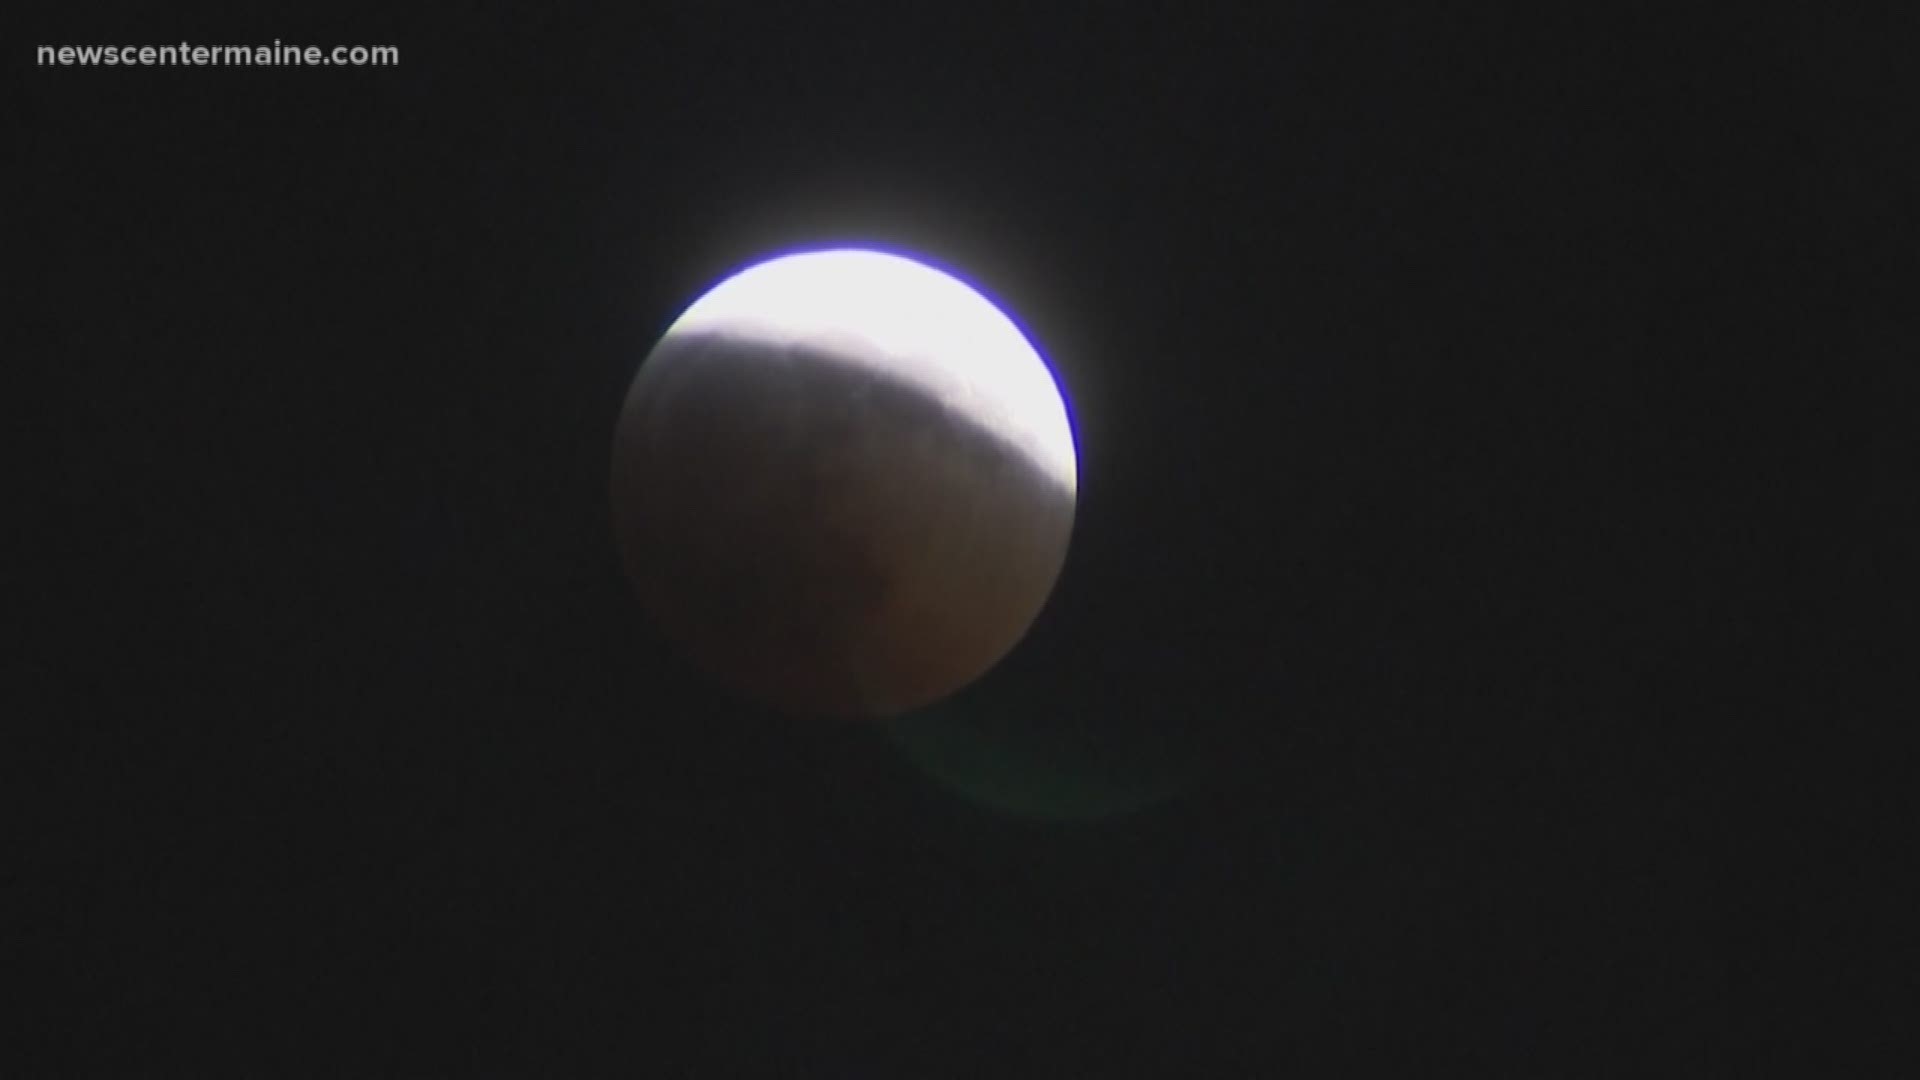 The year's first lunar eclipse happened last night.